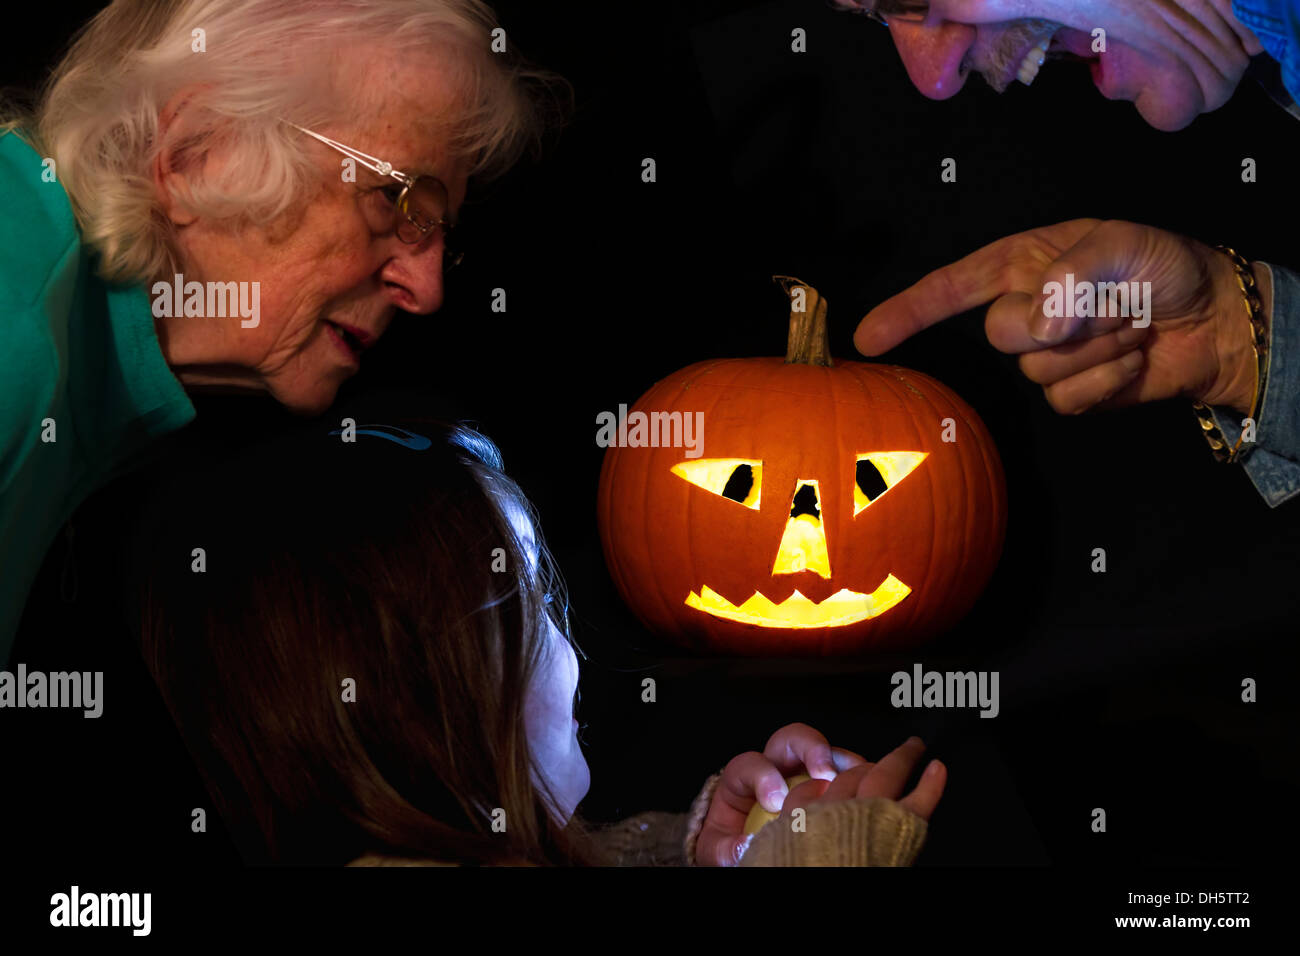 Halloween Pumpkin with young Downs Syndrome Girl. Stock Photo